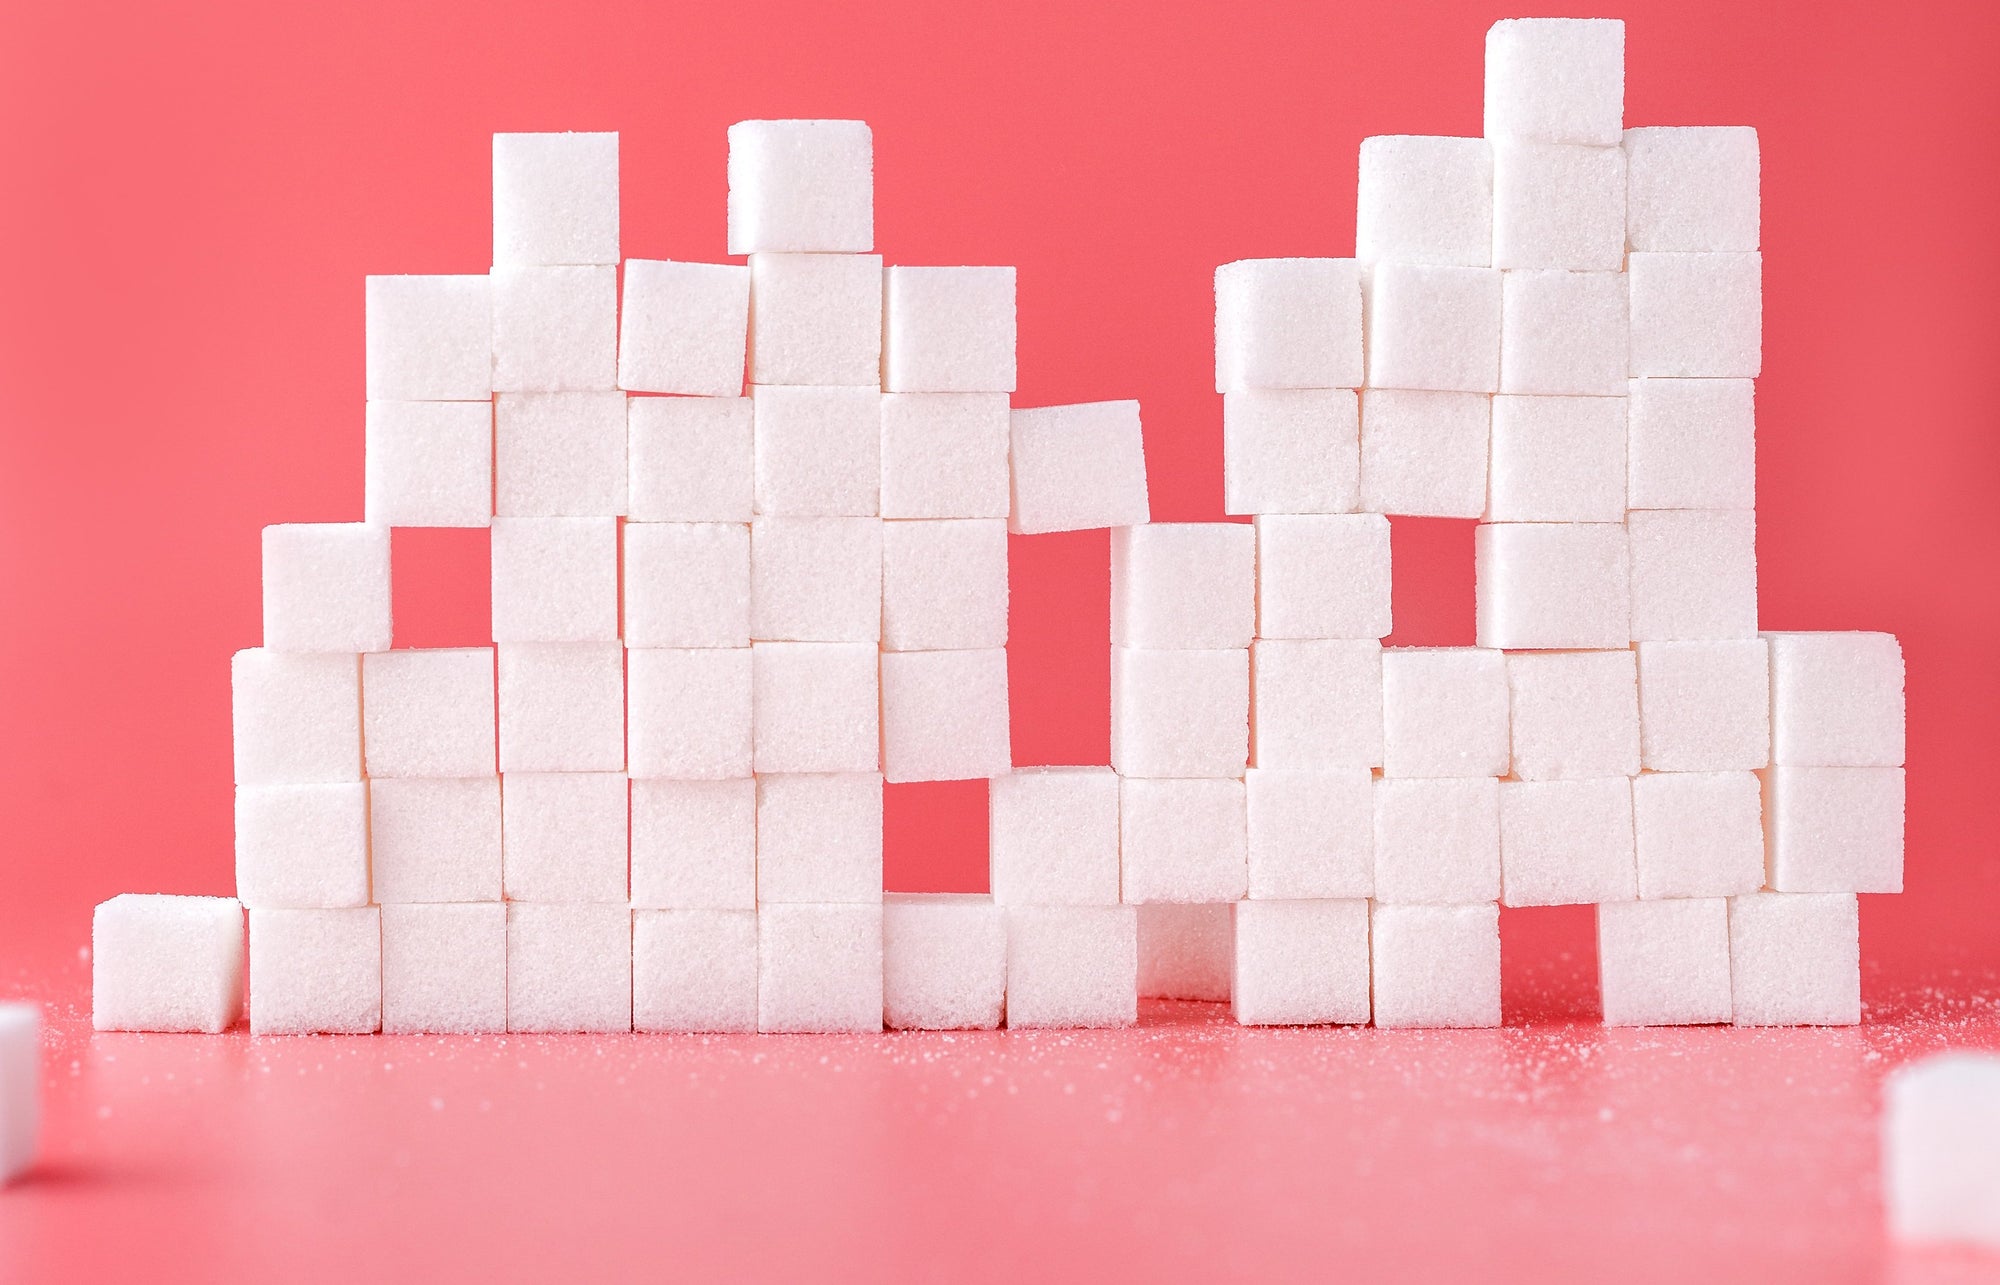 Think all sugar is bad? Not so fast...